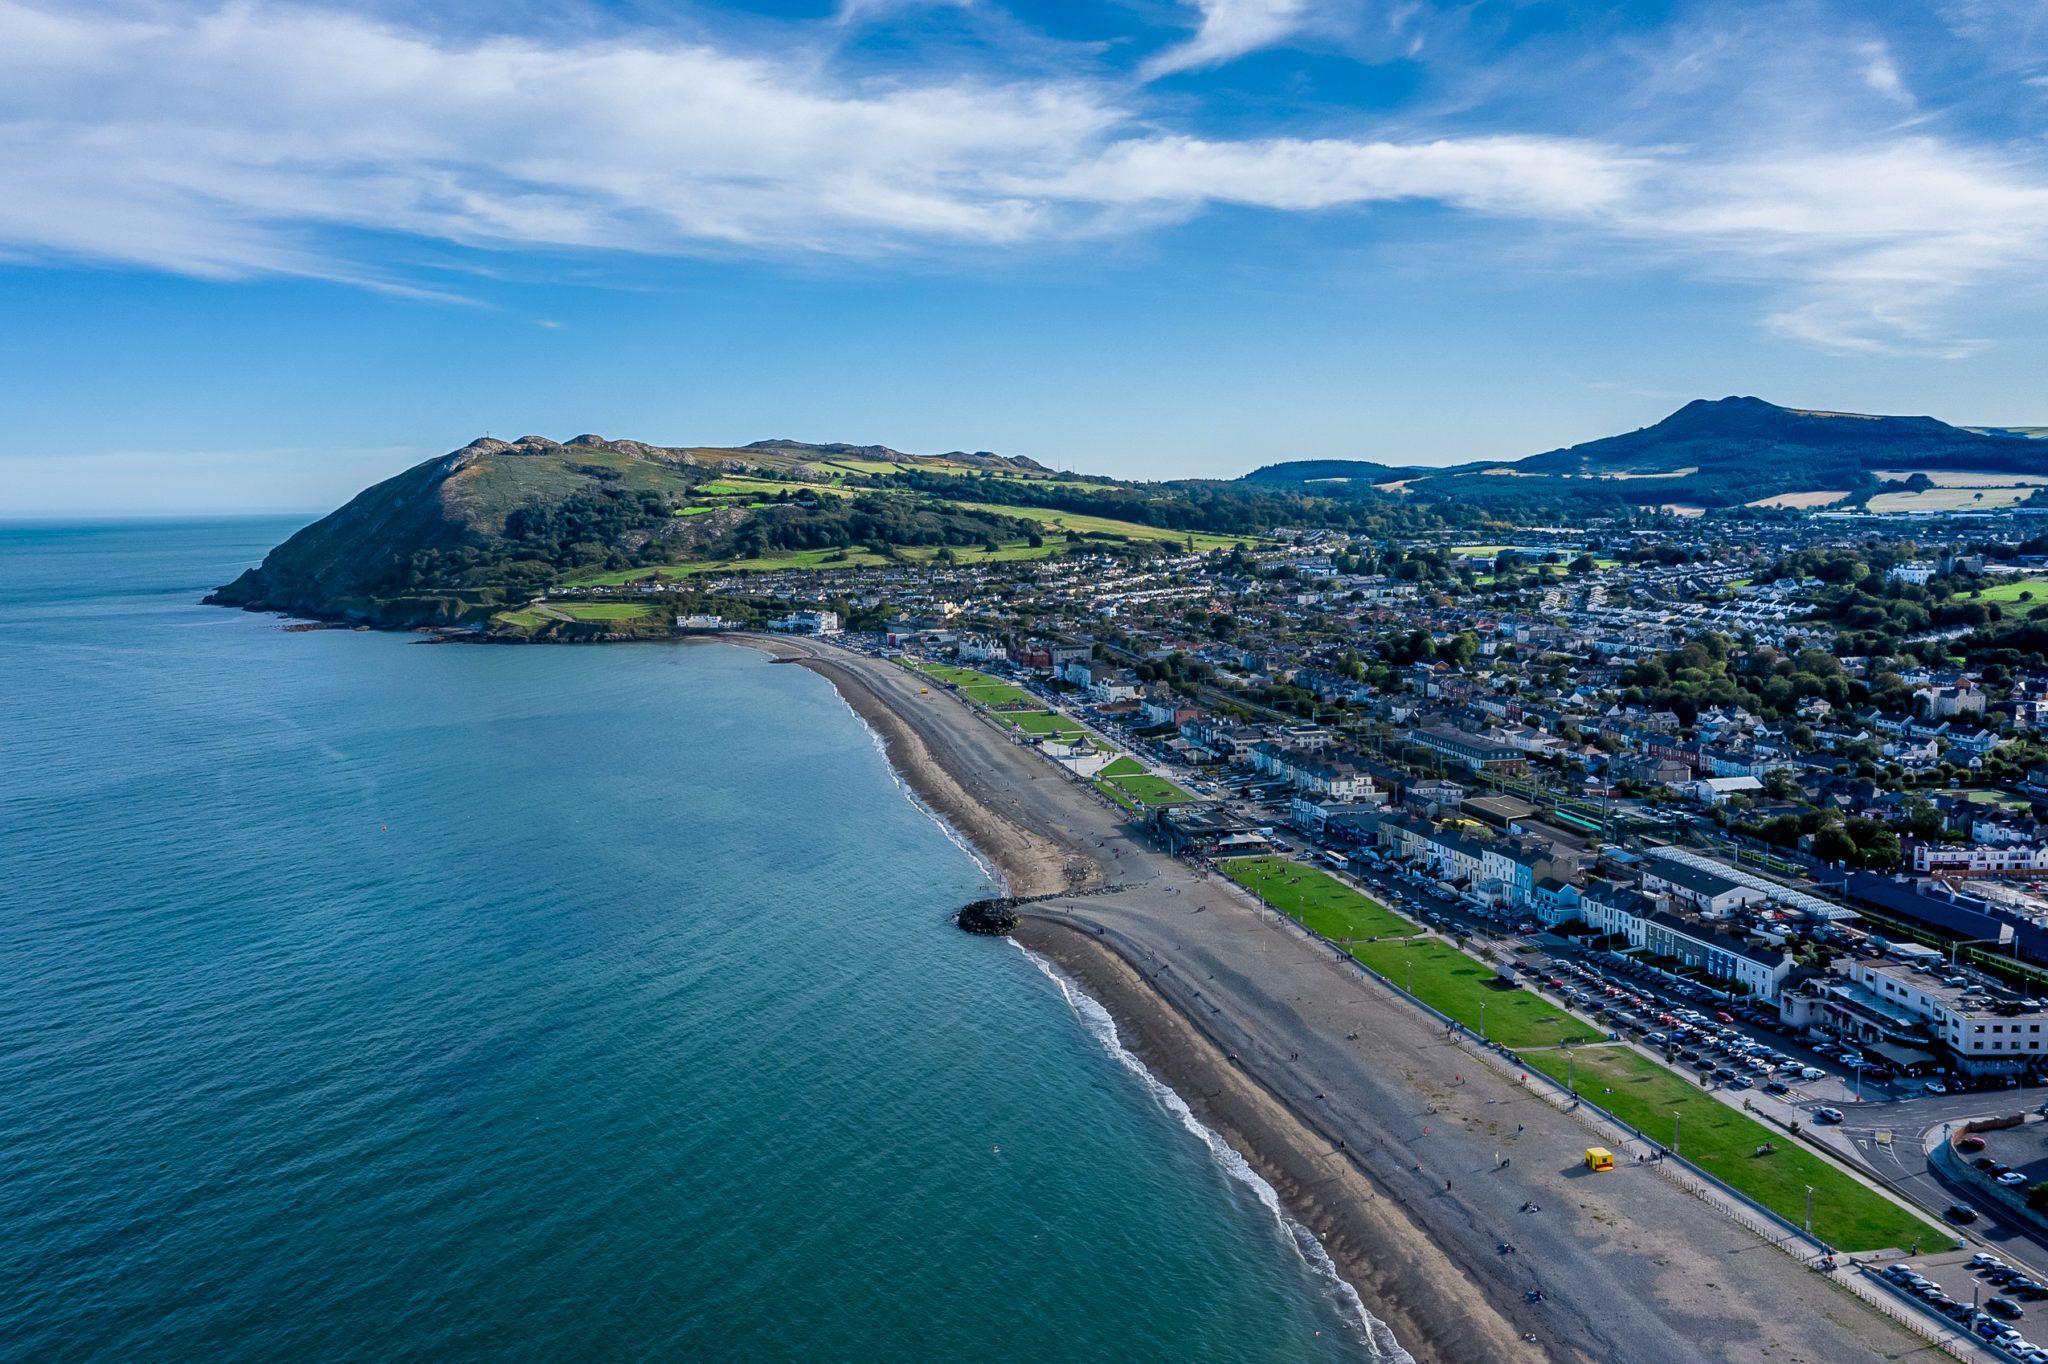 Bray earns a place on Time Out’s most underrated travel destinations list